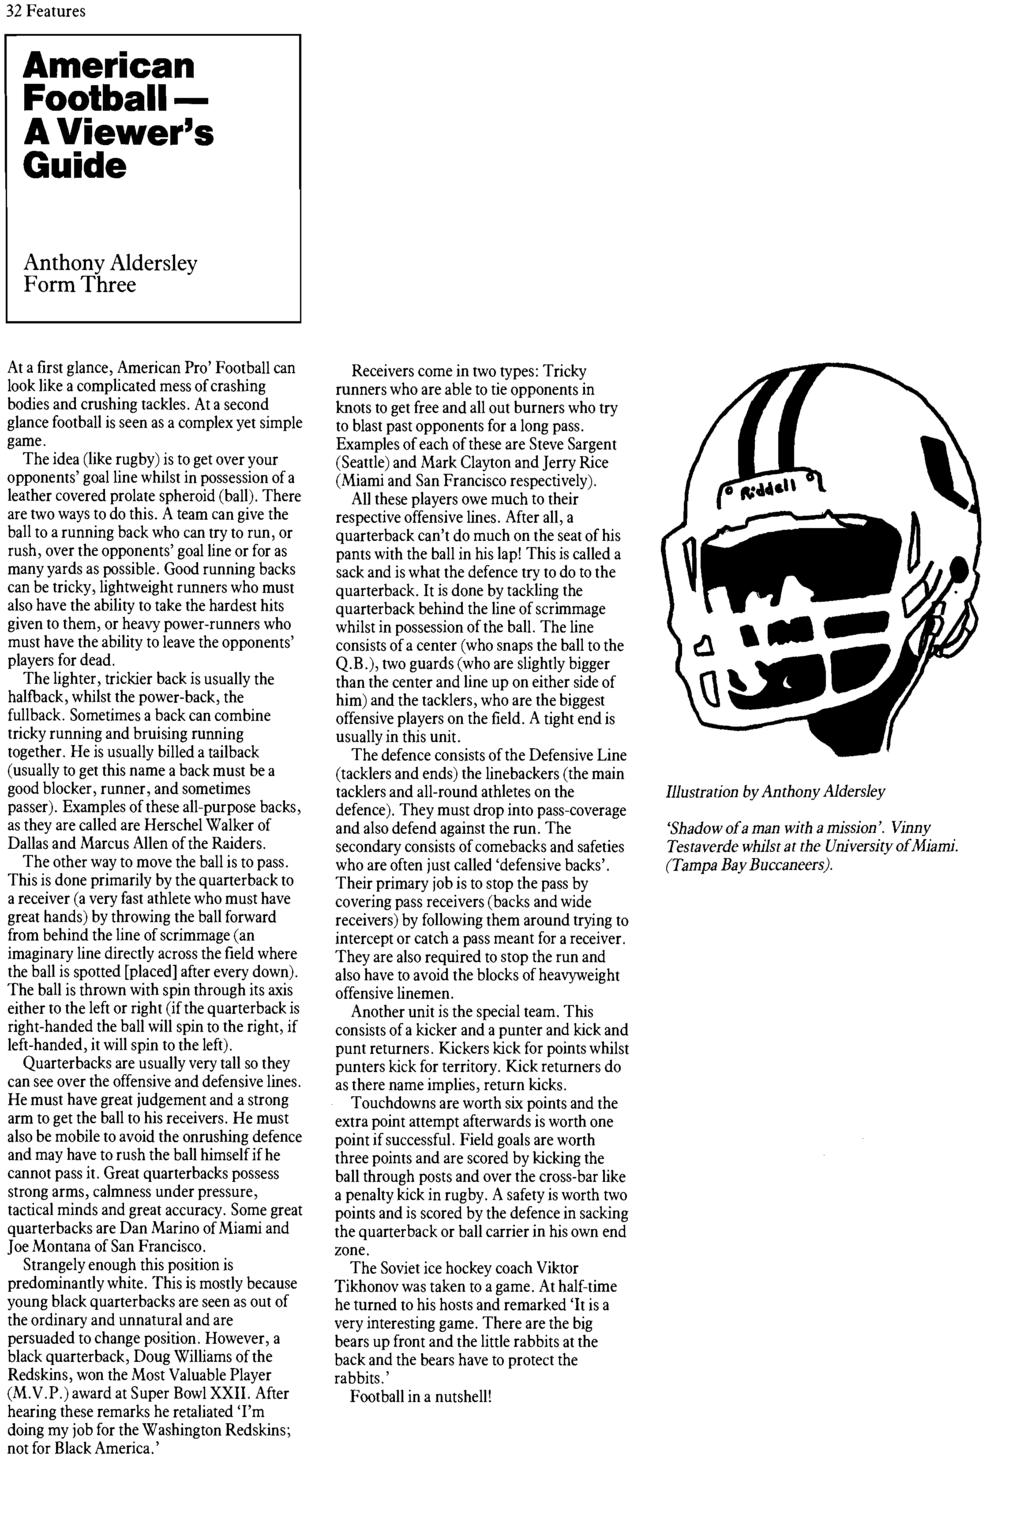 32 Features American Football A Viewer's Guide Anthony Aldersley Form Three At a first glance, American Pro' Football can look like a complicated mess of crashing bodies and crushing tackles.